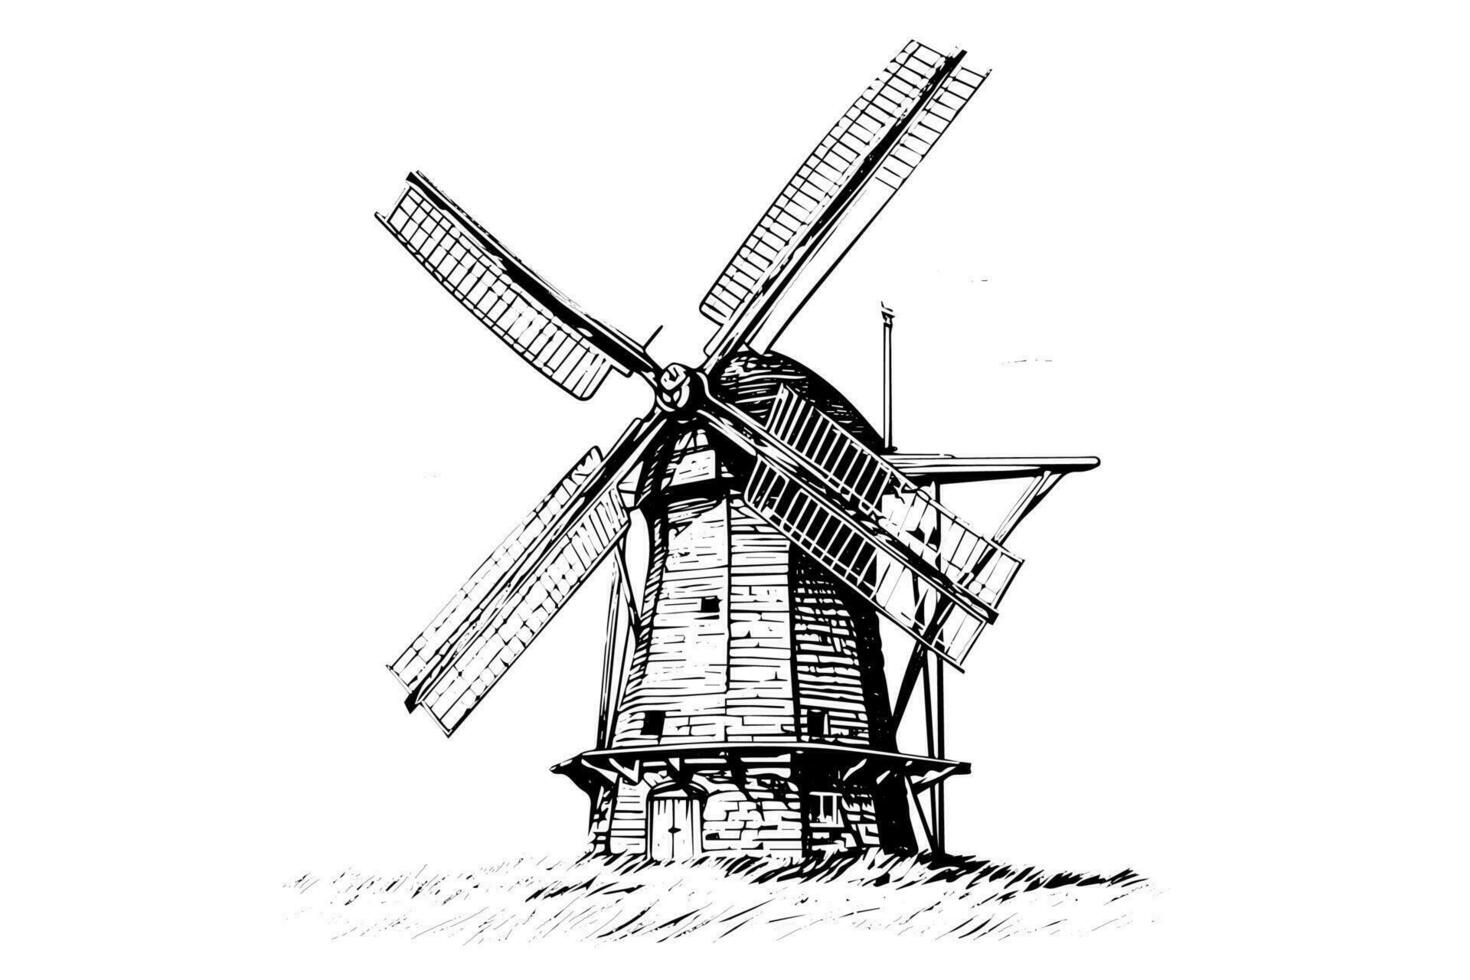 Windmil in the field hand drawn vintage sketch. Engraving style vector illustration.